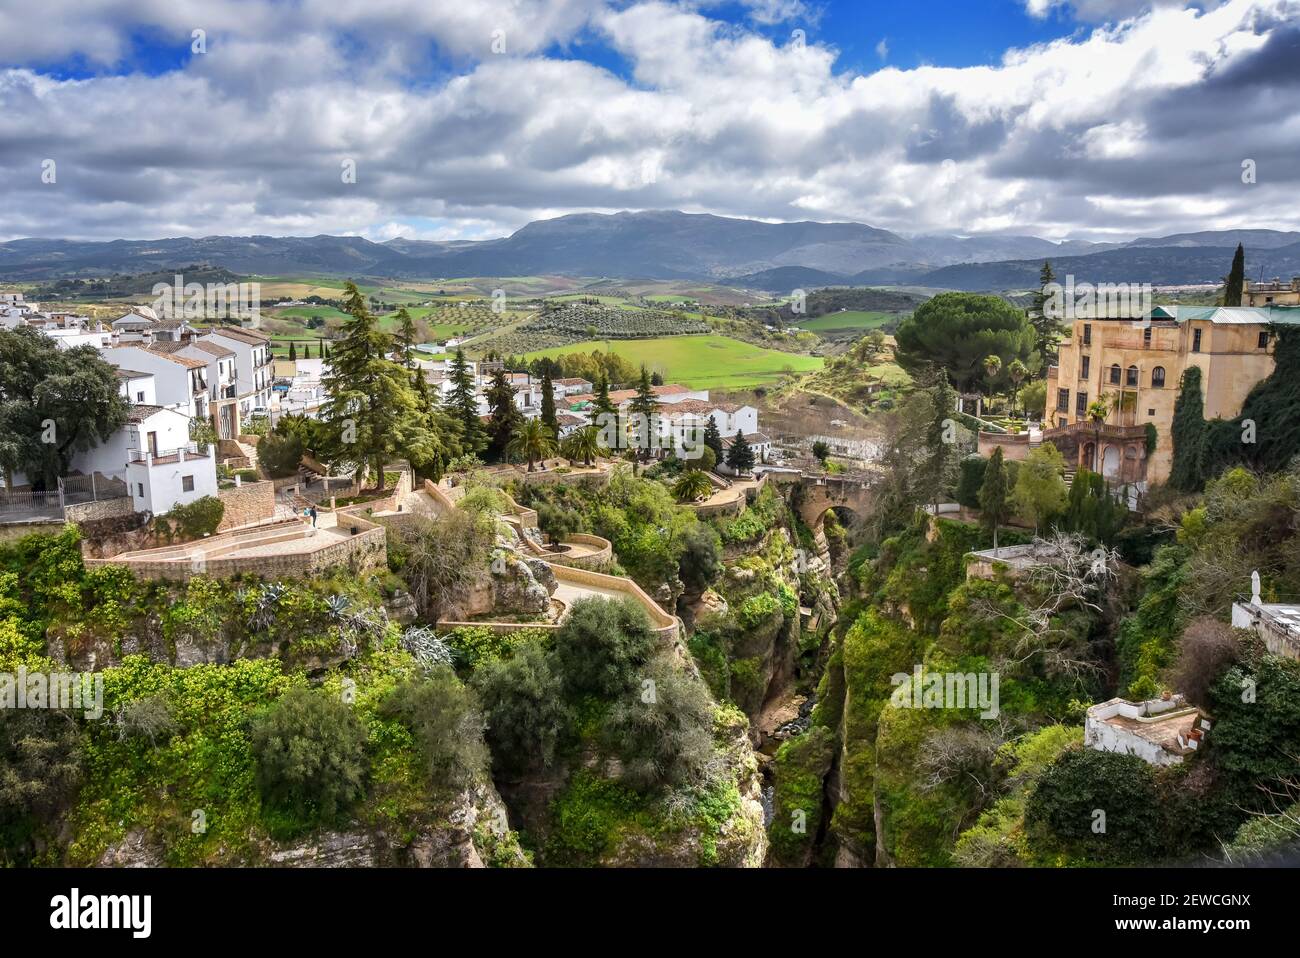 Magnificent view of the city of Ronda in Spain Stock Photo